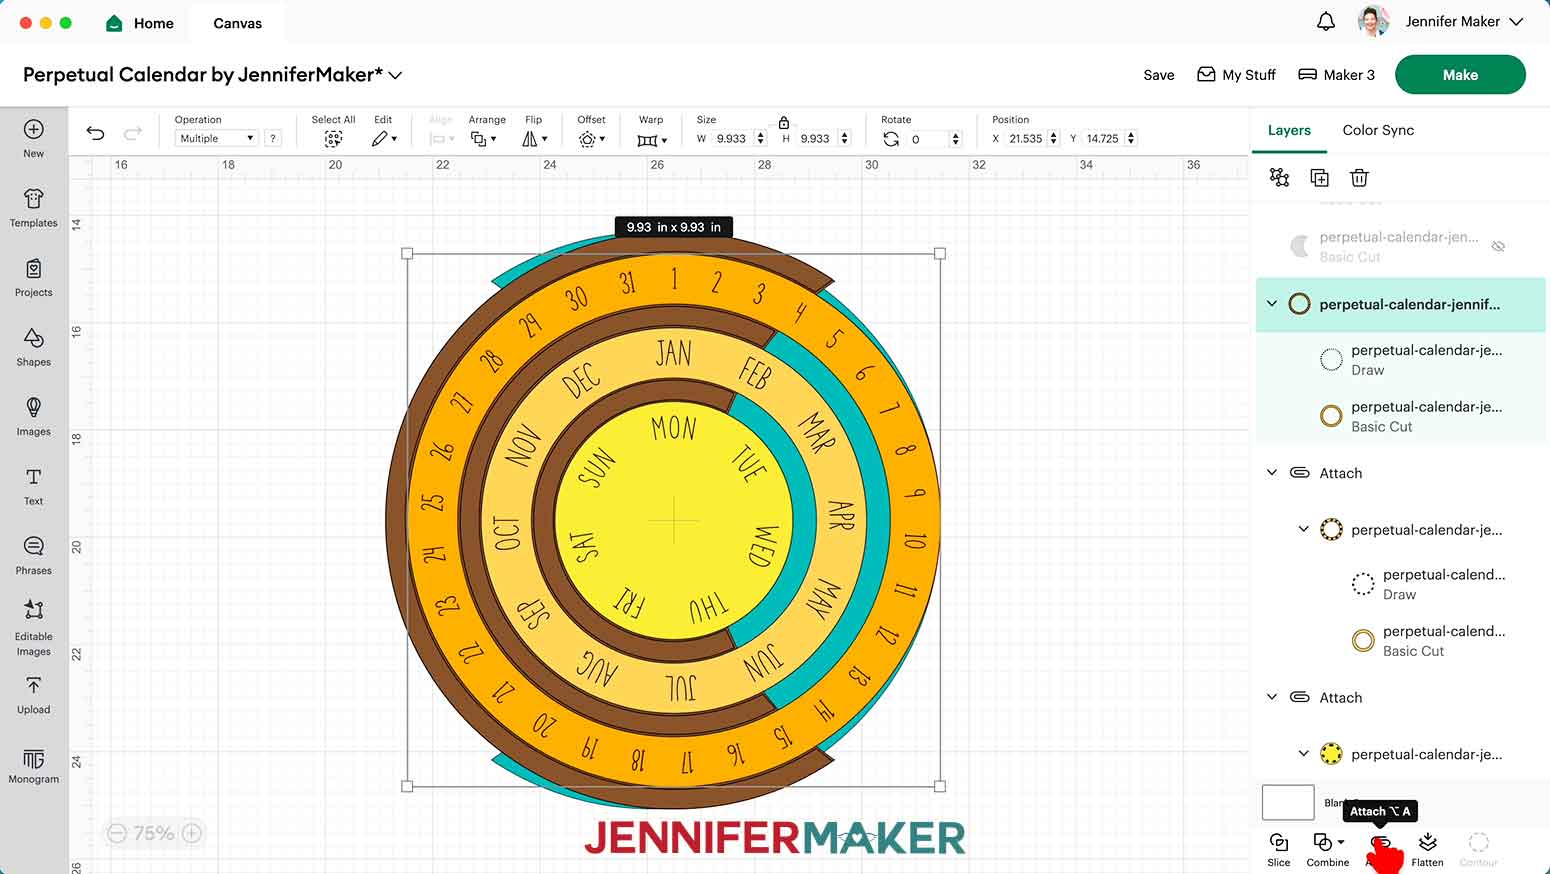 In Cricut Design Space, select the perpetual calendar's grouped wheel Draw and Basic Cut layers and click Attach to keep them together